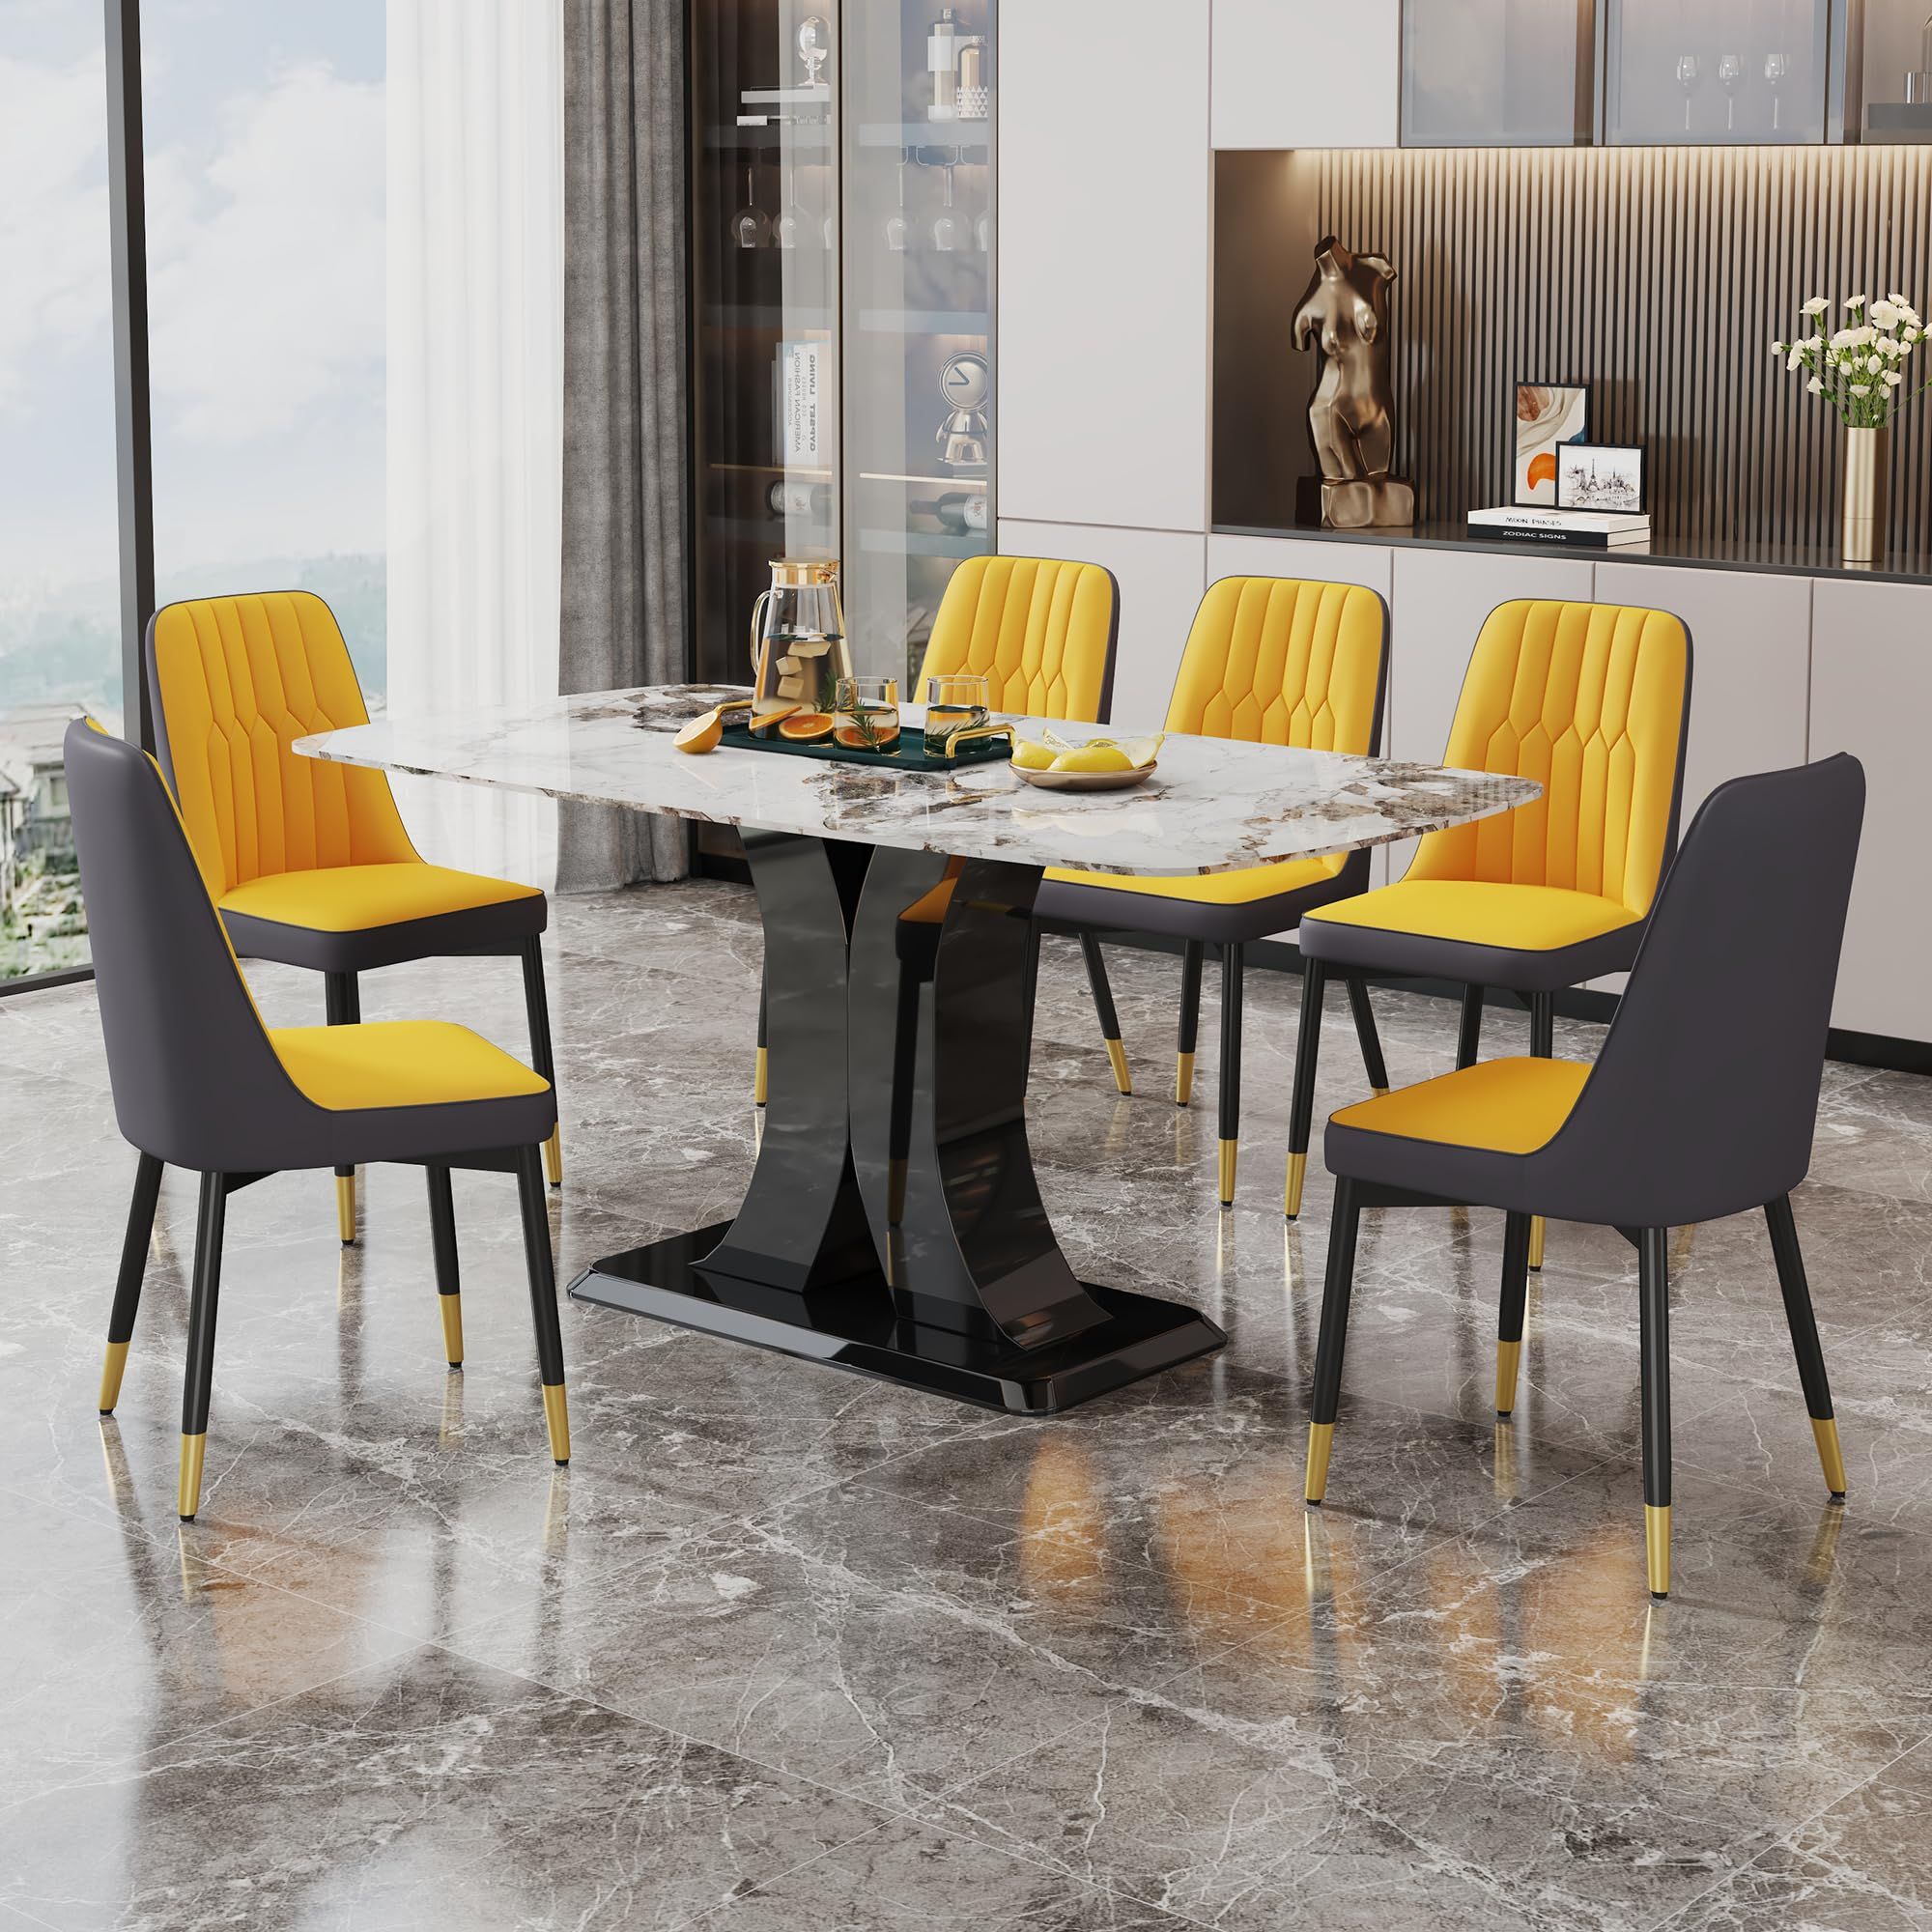 Exquisite Marble Dining Room Table and Chair Sets: Elevate Your Dining Experience with Luxury